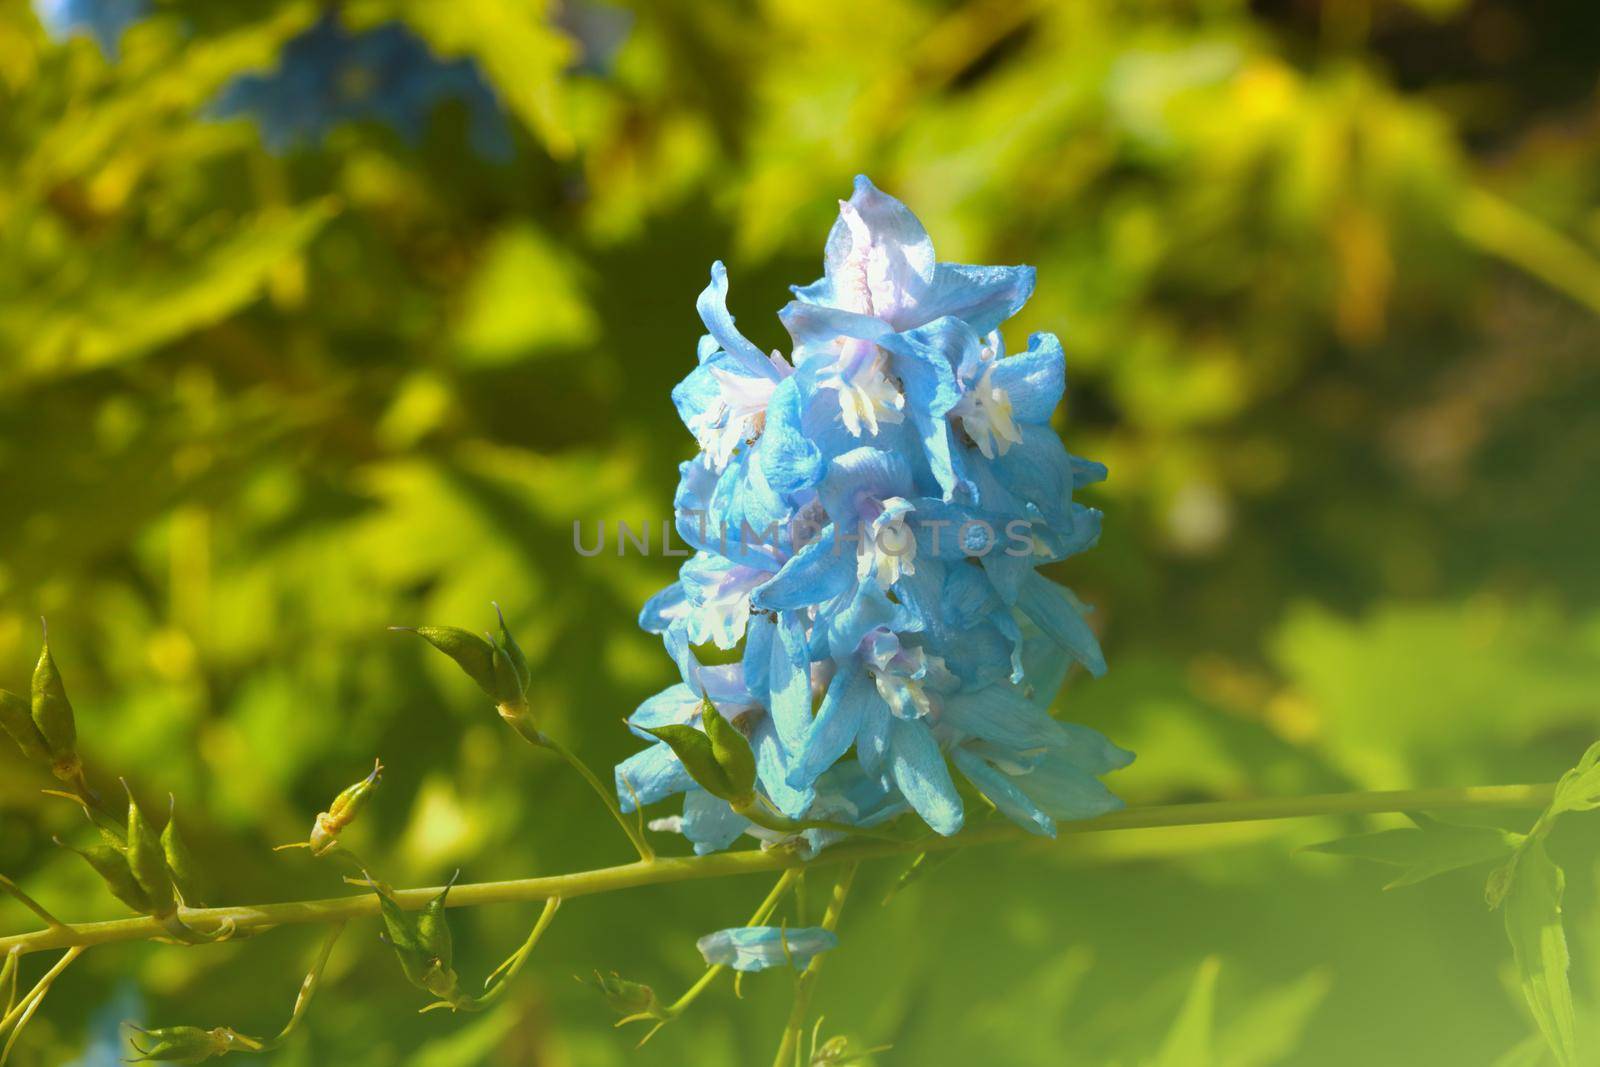 The blue flower blooms in the spring in the park